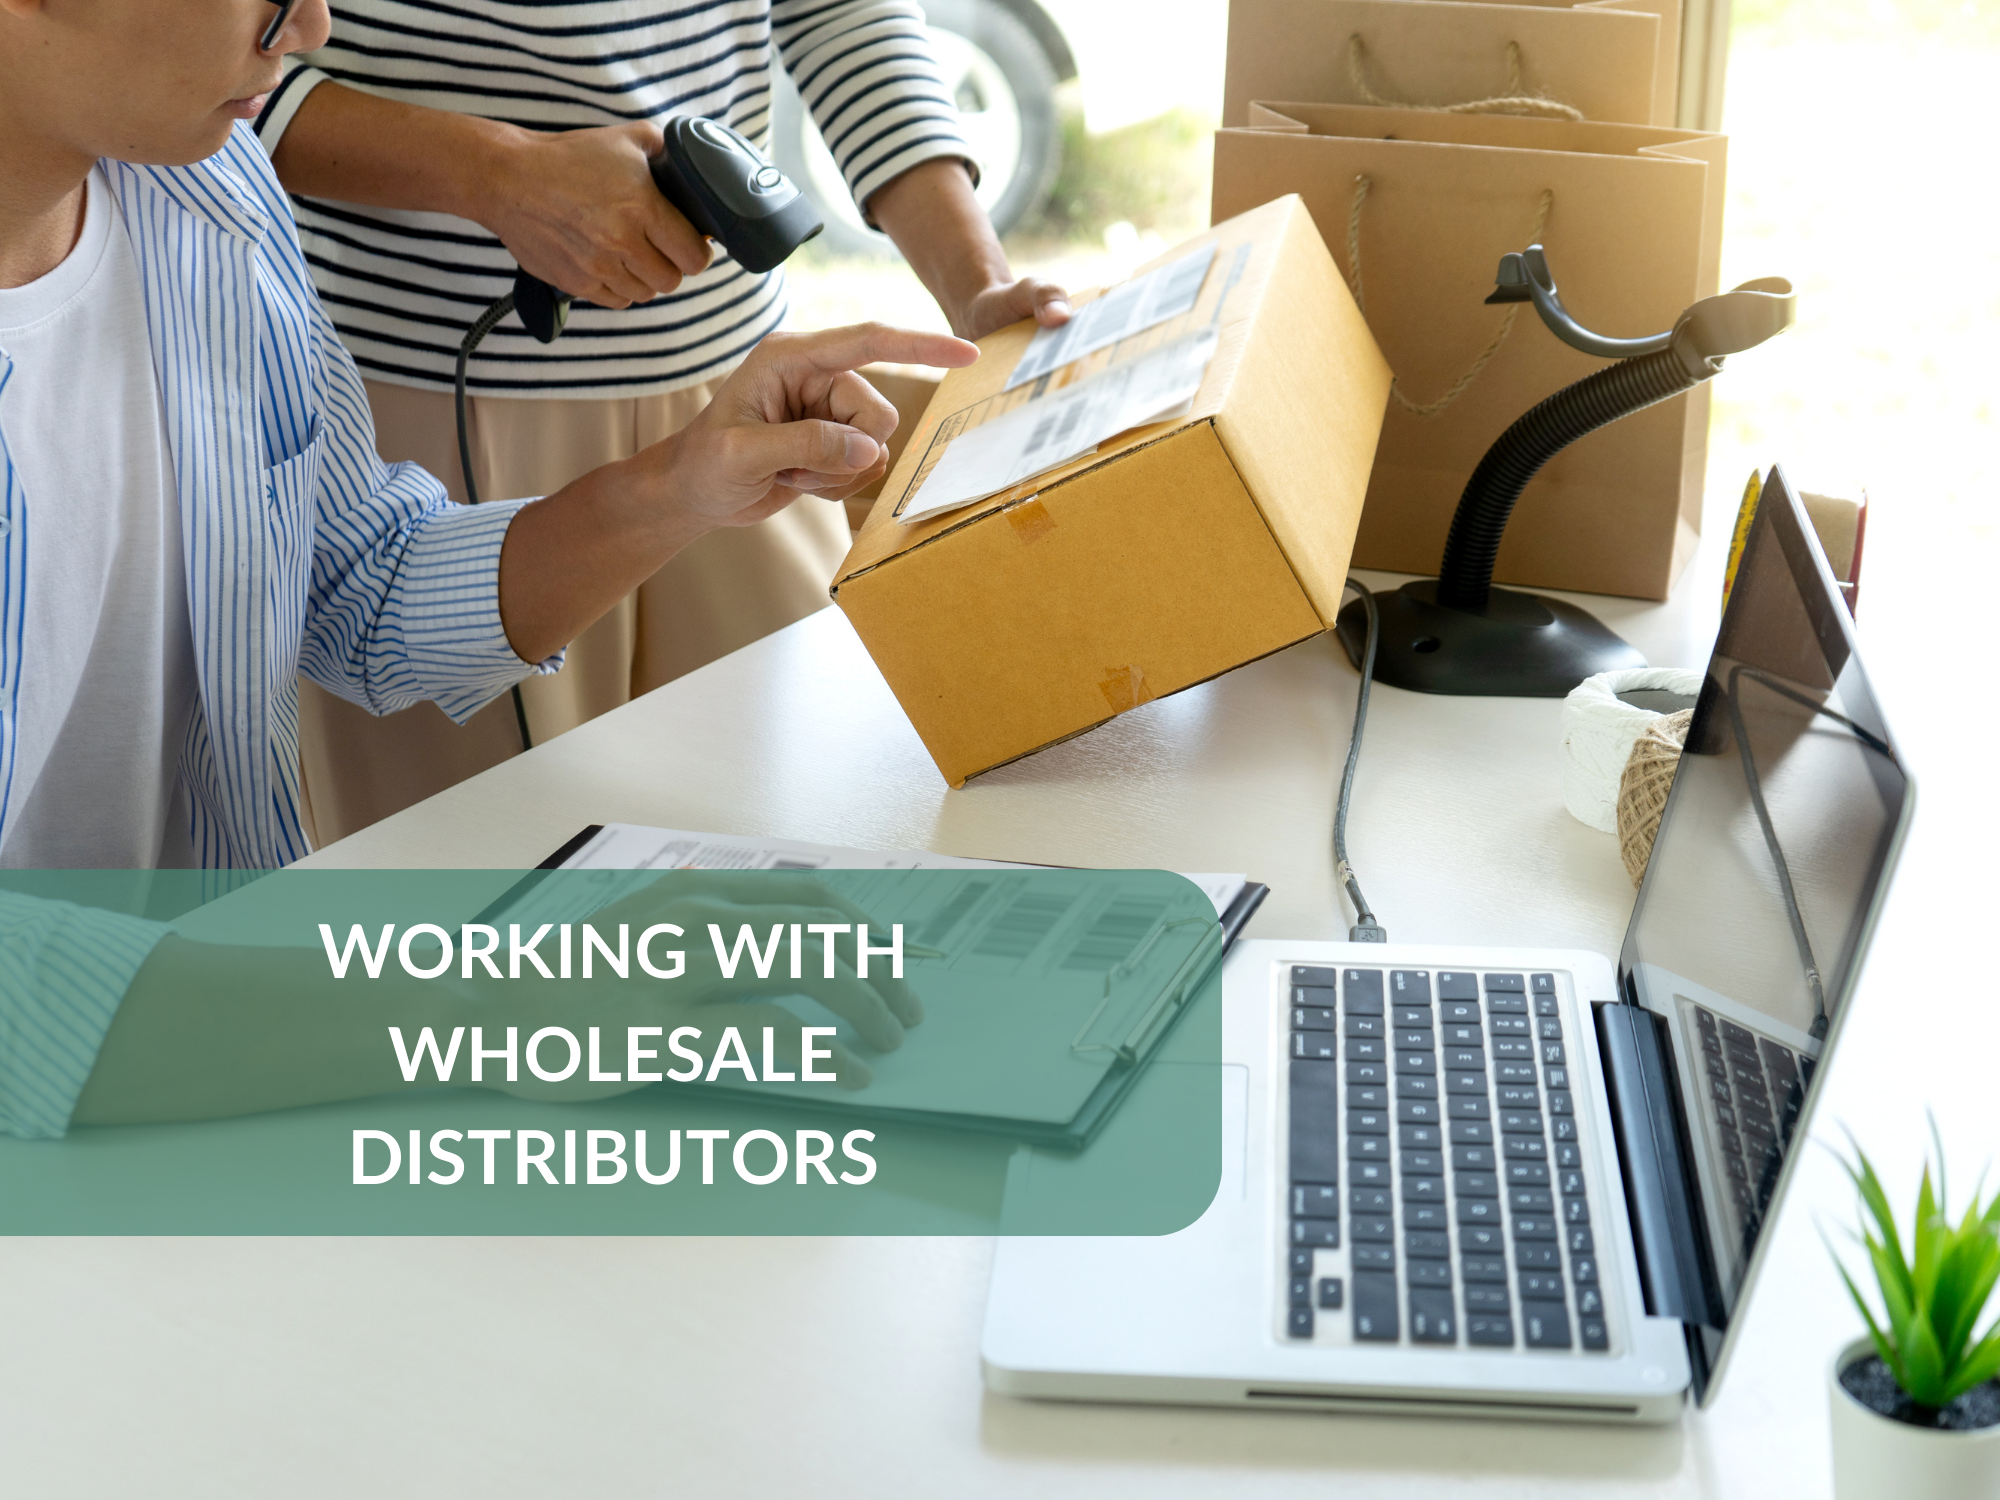 Working with wholesale distributors